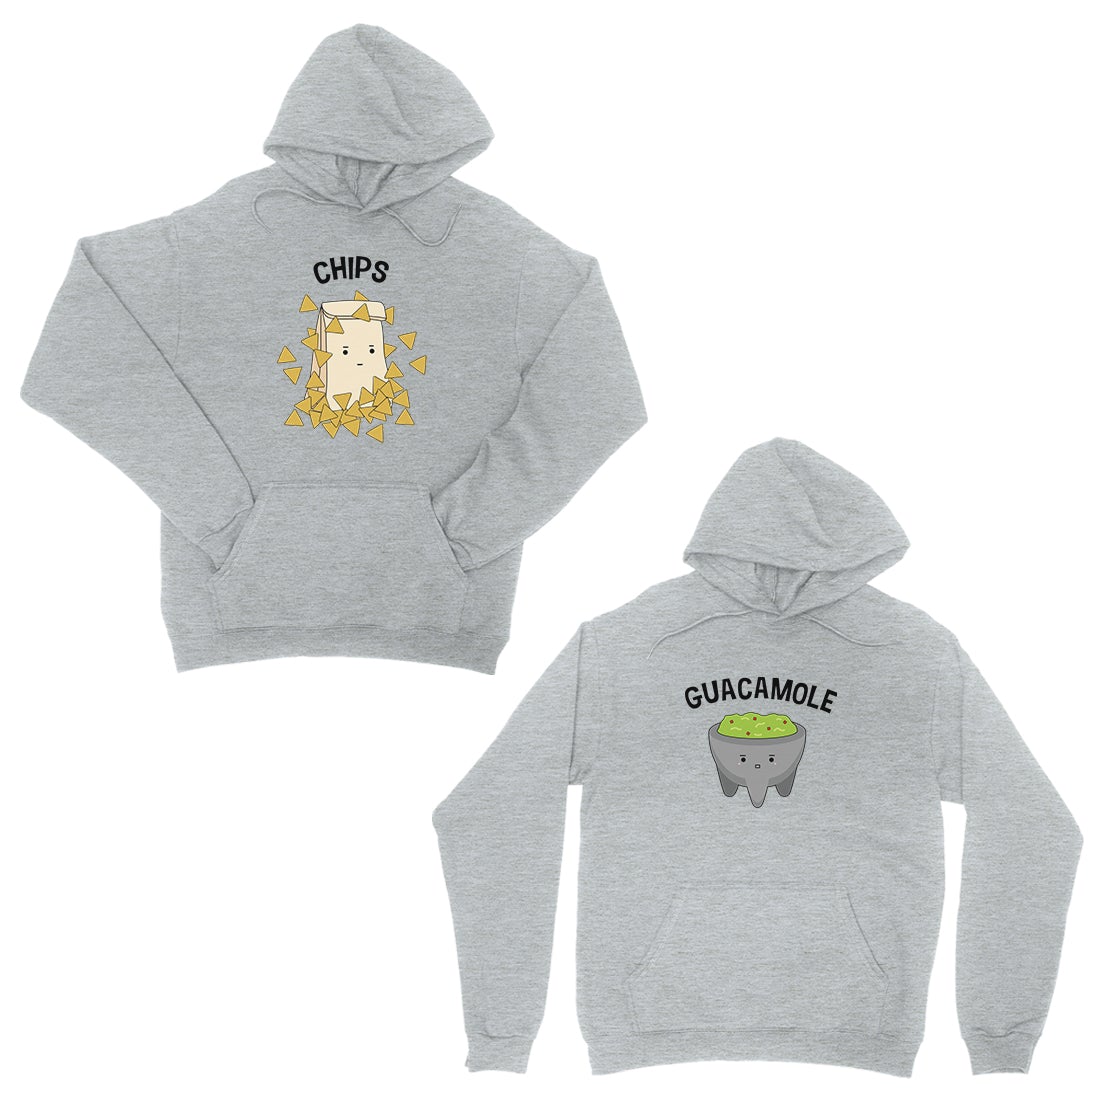 Chips & Guacamole Grey Matching Couple Hoodies For Anniversary Gift